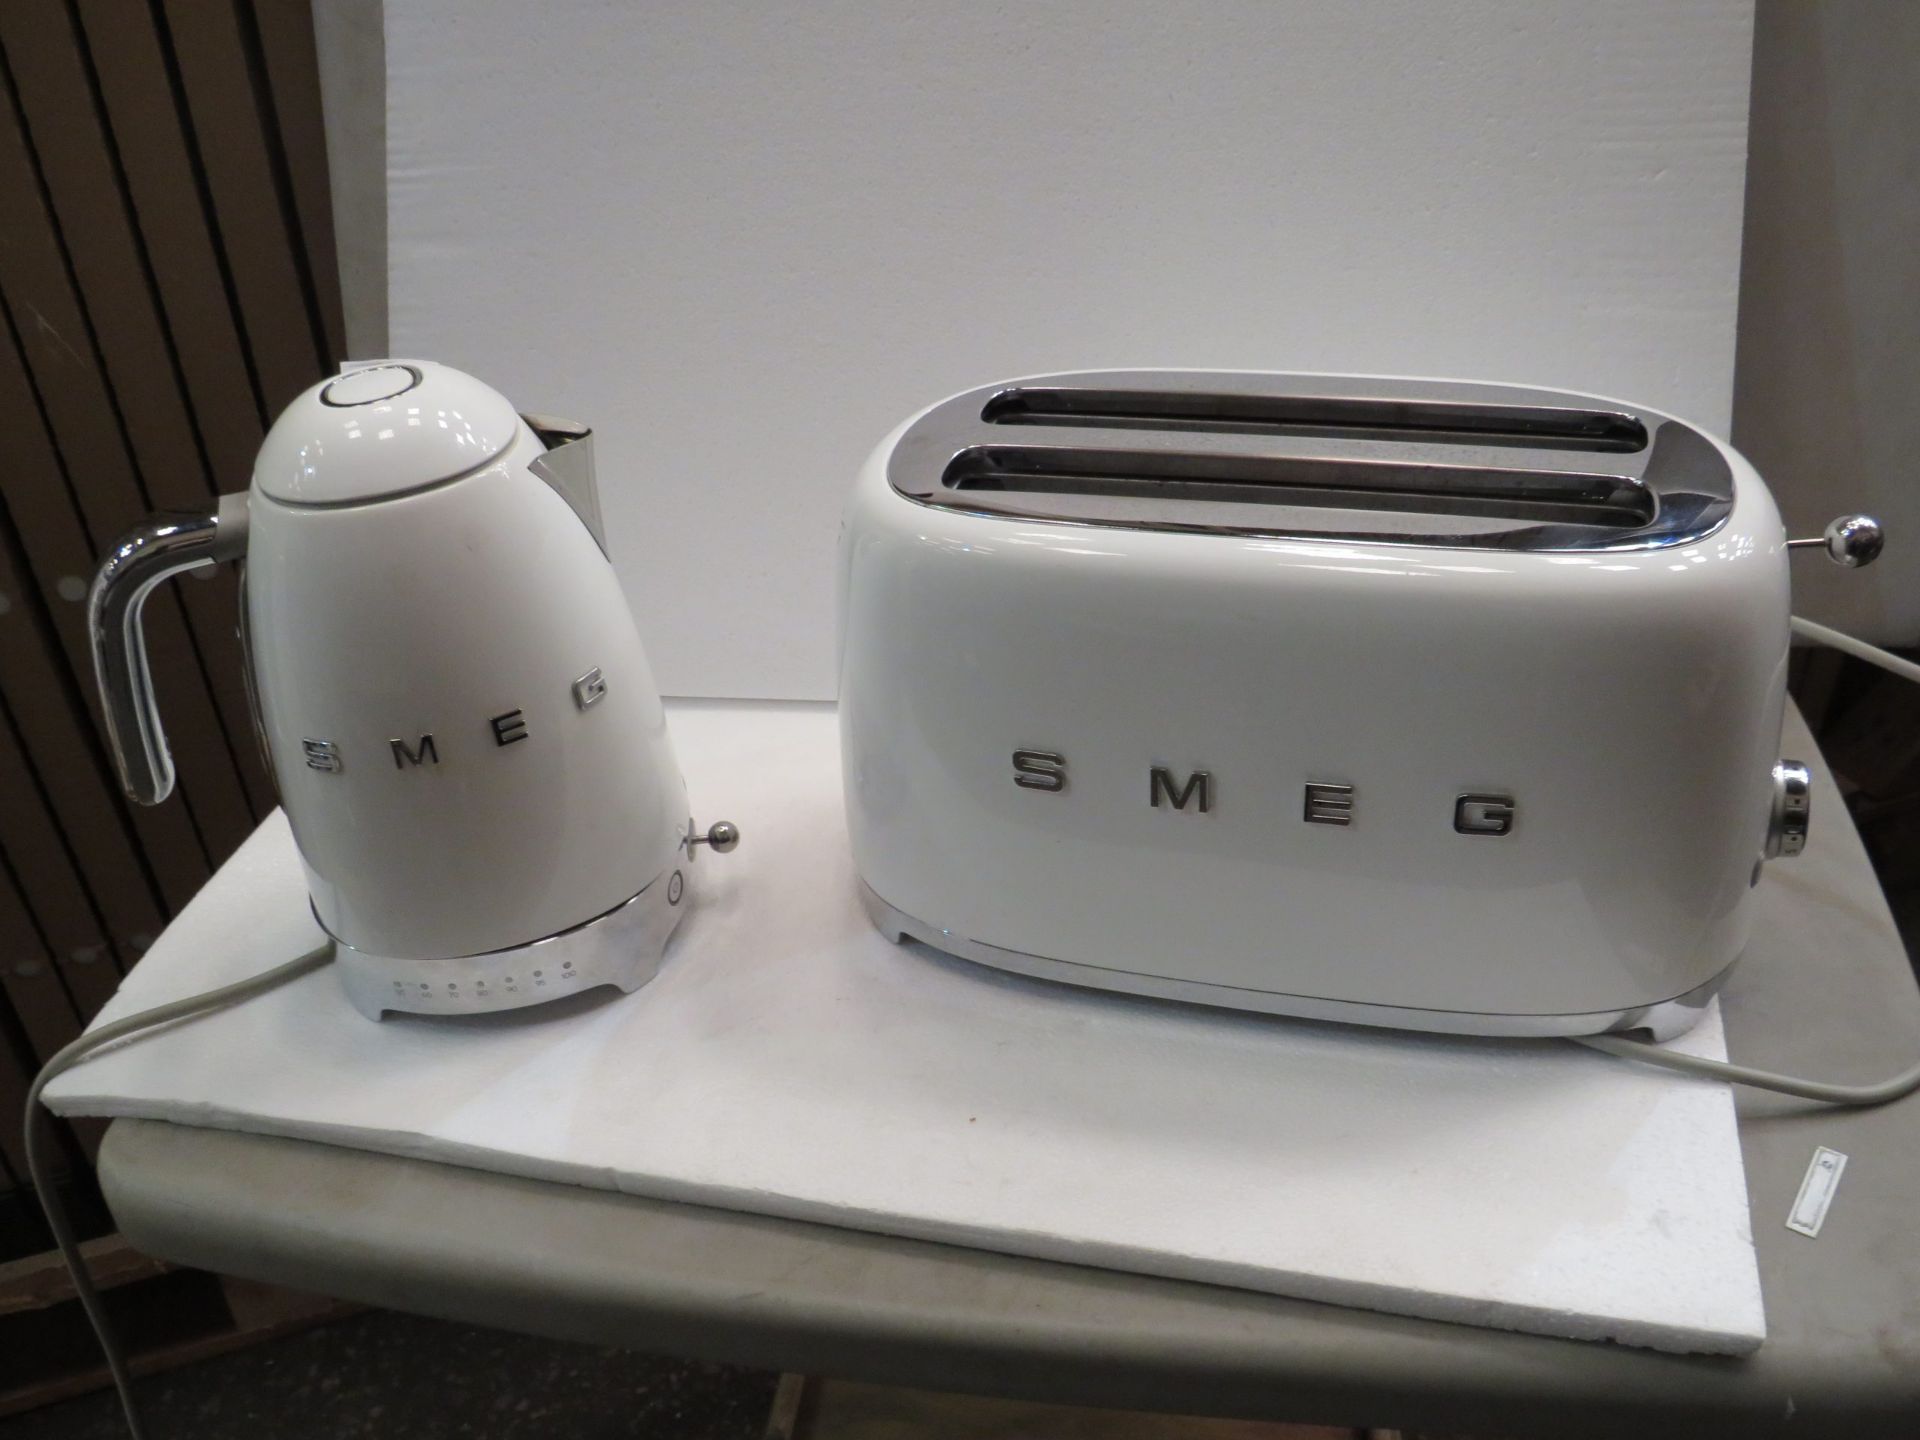 Smeg kettle and toaster set, tested working and in good condition RRP ?310